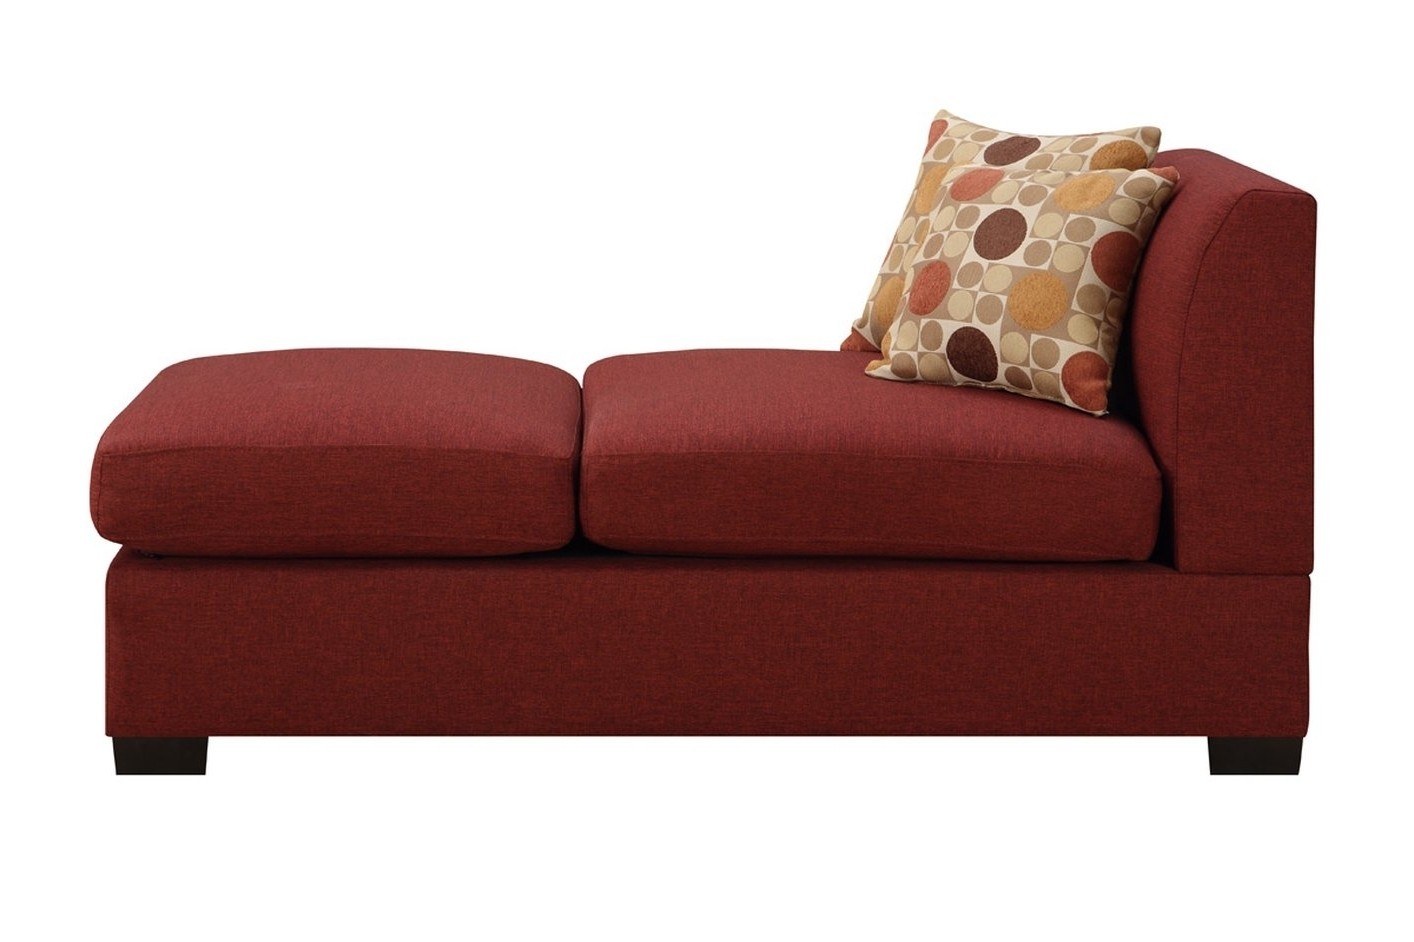 15 best red chaise lounges 1